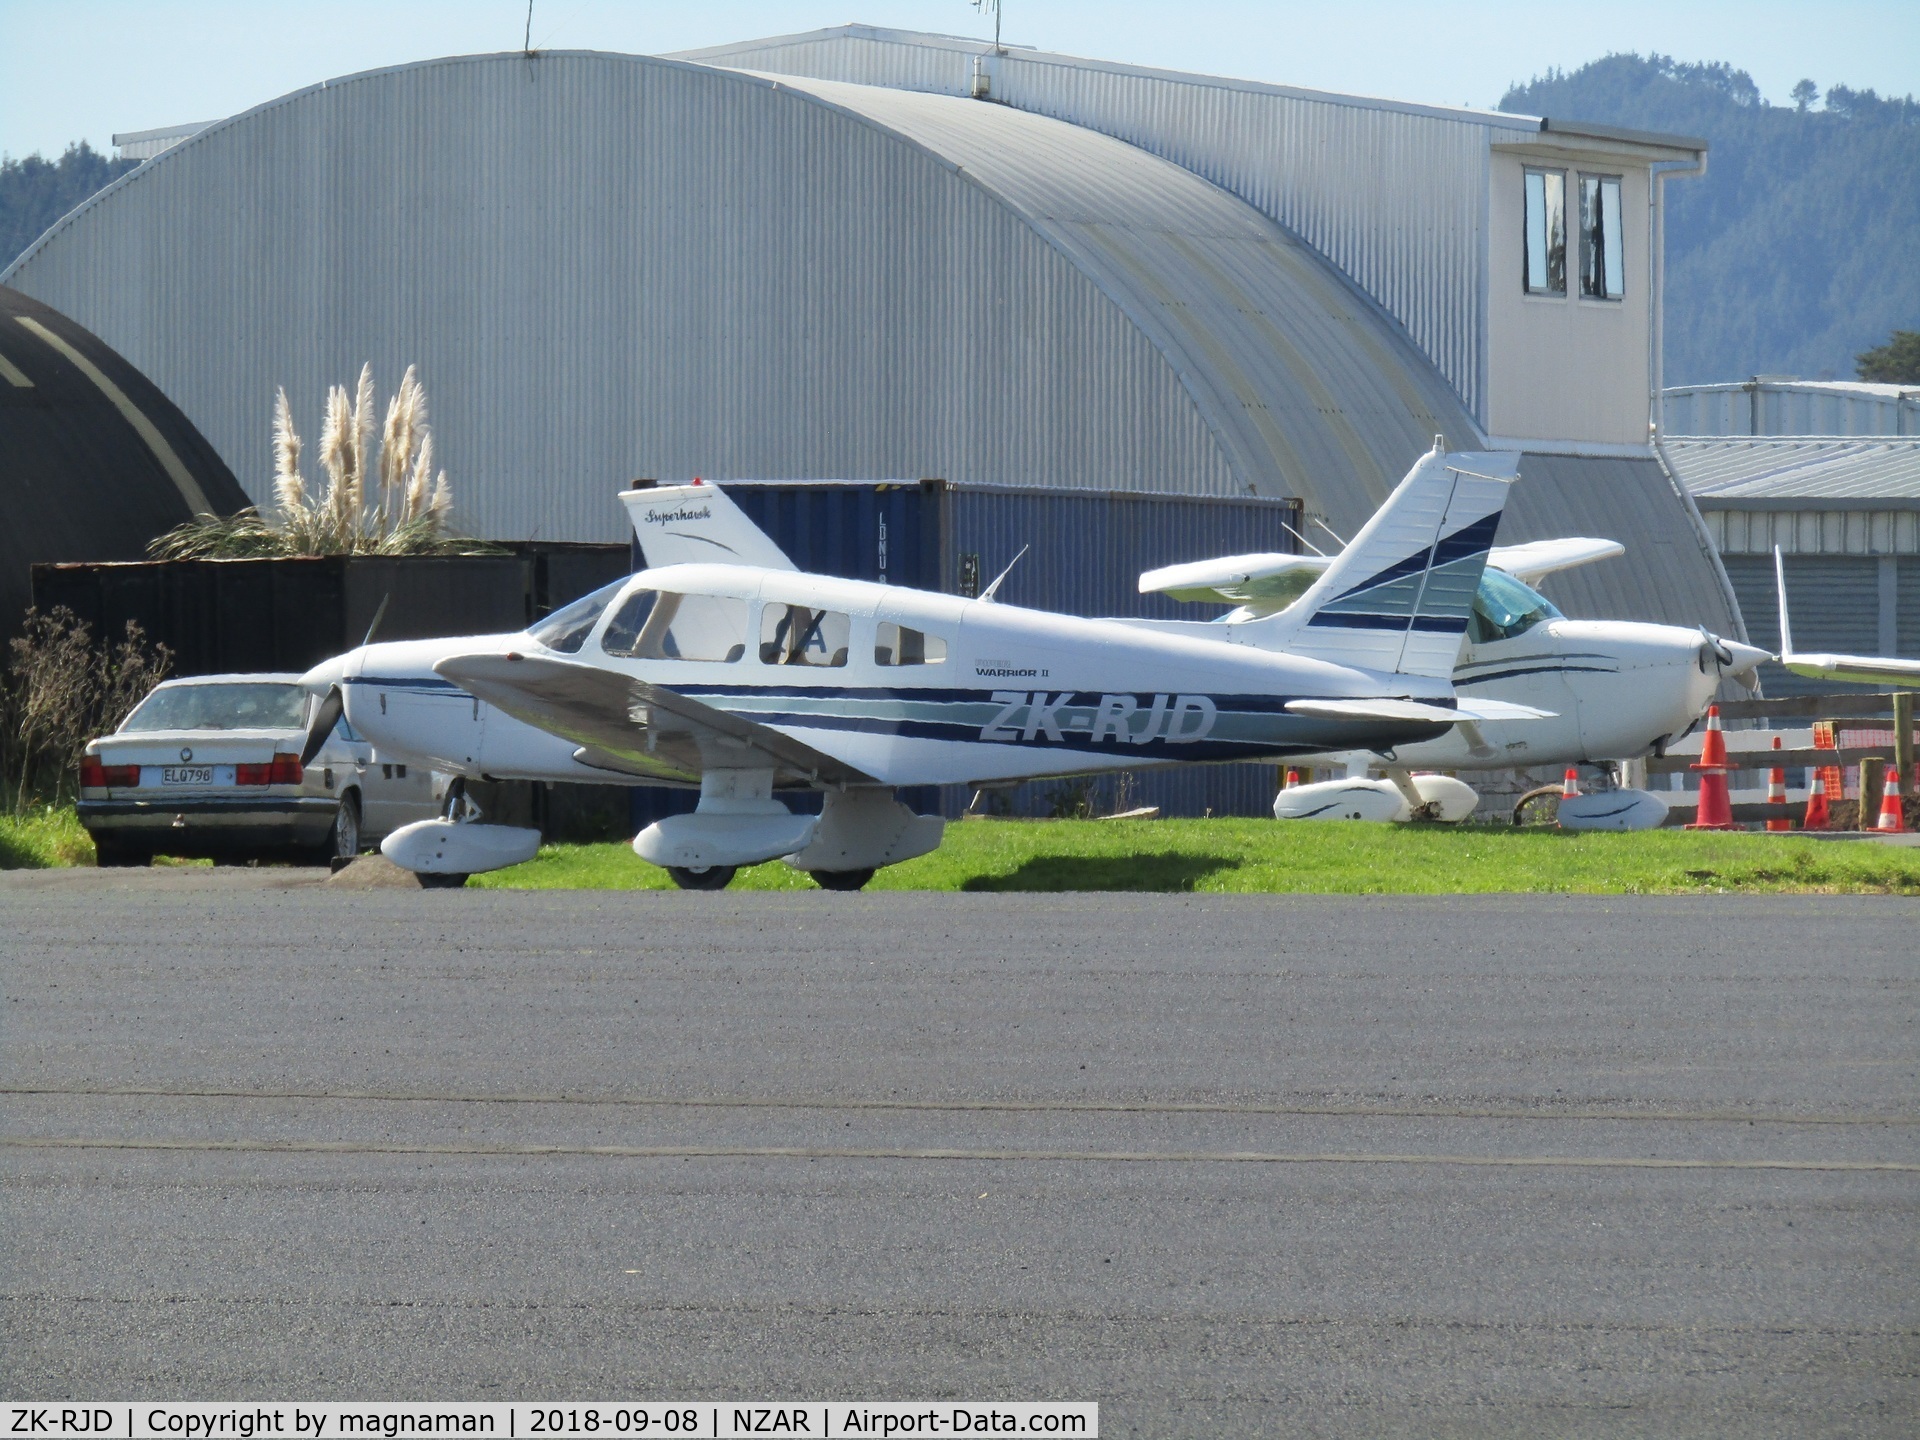 ZK-RJD, Piper PA-28-161 Warrior II C/N 28-7916439, at home base